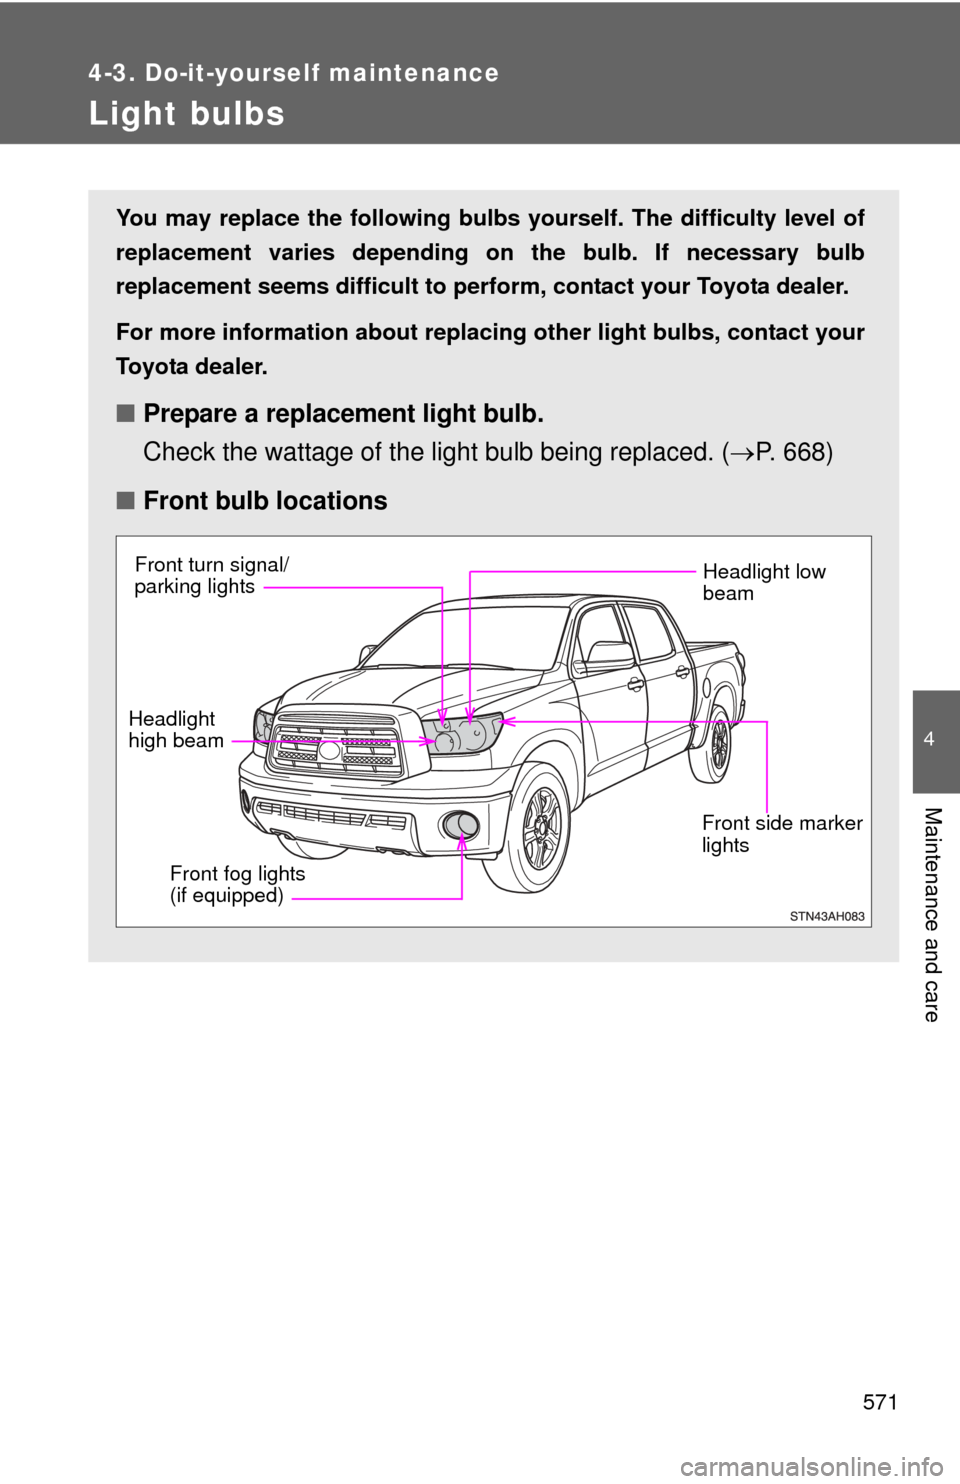 TOYOTA TUNDRA 2010 2.G Owners Manual 571
4-3. Do-it-yourself maintenance
4
Maintenance and care
Light bulbs
You may replace the following bulbs yourself. The difficulty level of
replacement varies depending on the bulb. If necessary bulb